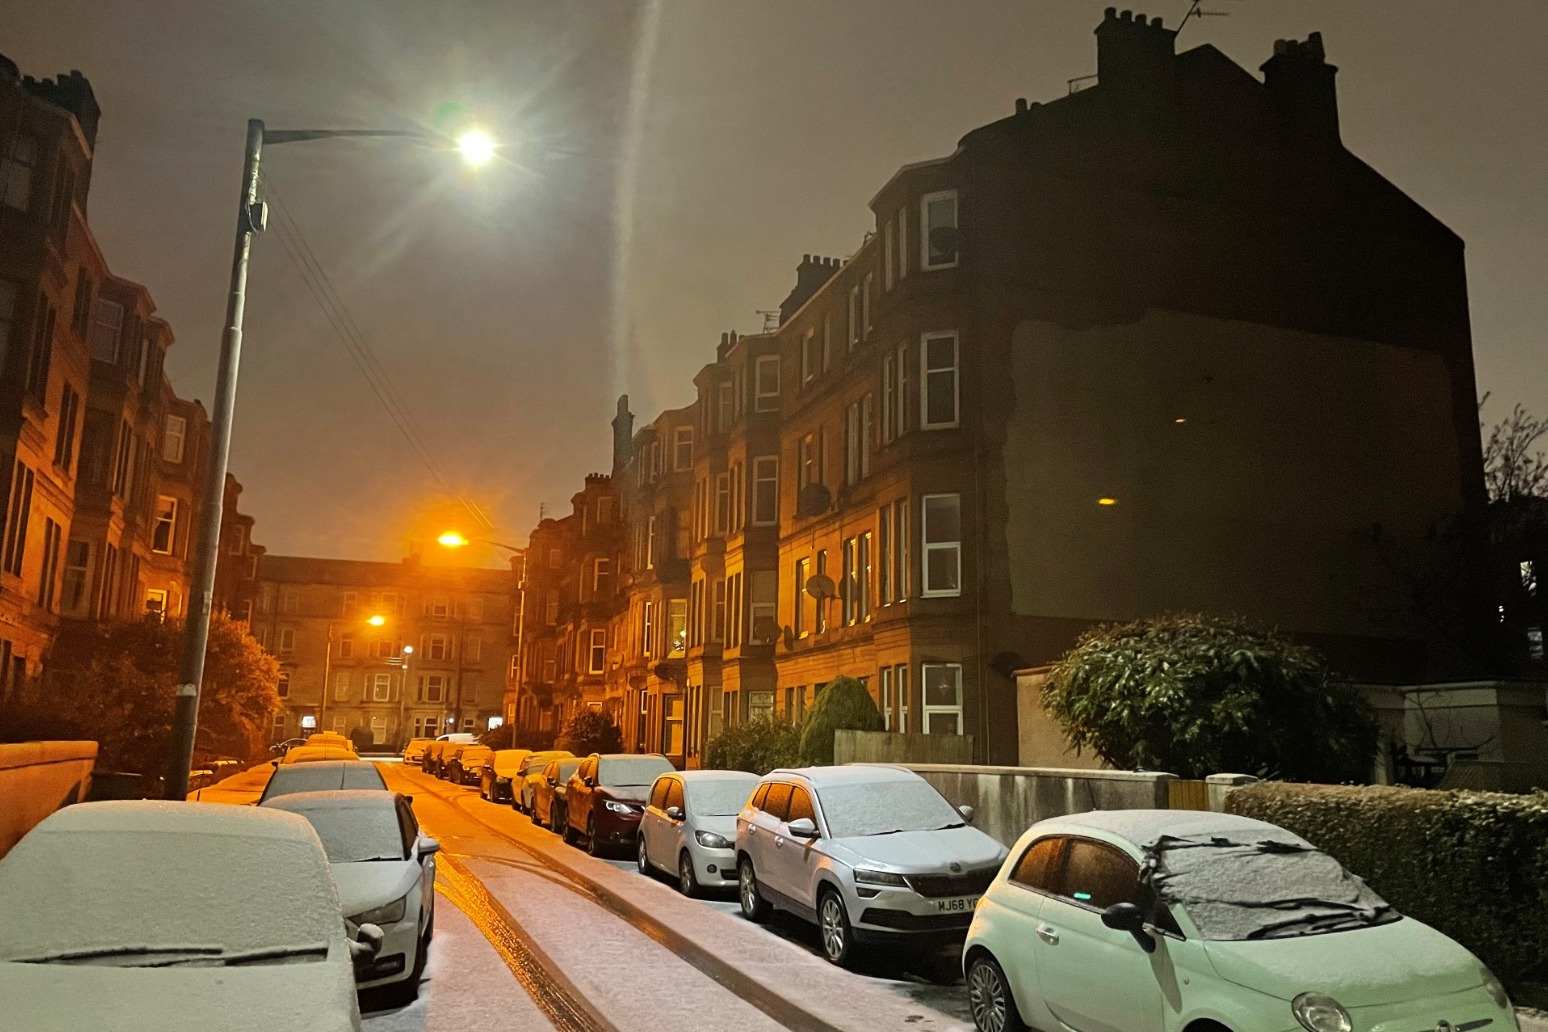 Amber weather warning in force as snow brings travel disruption 